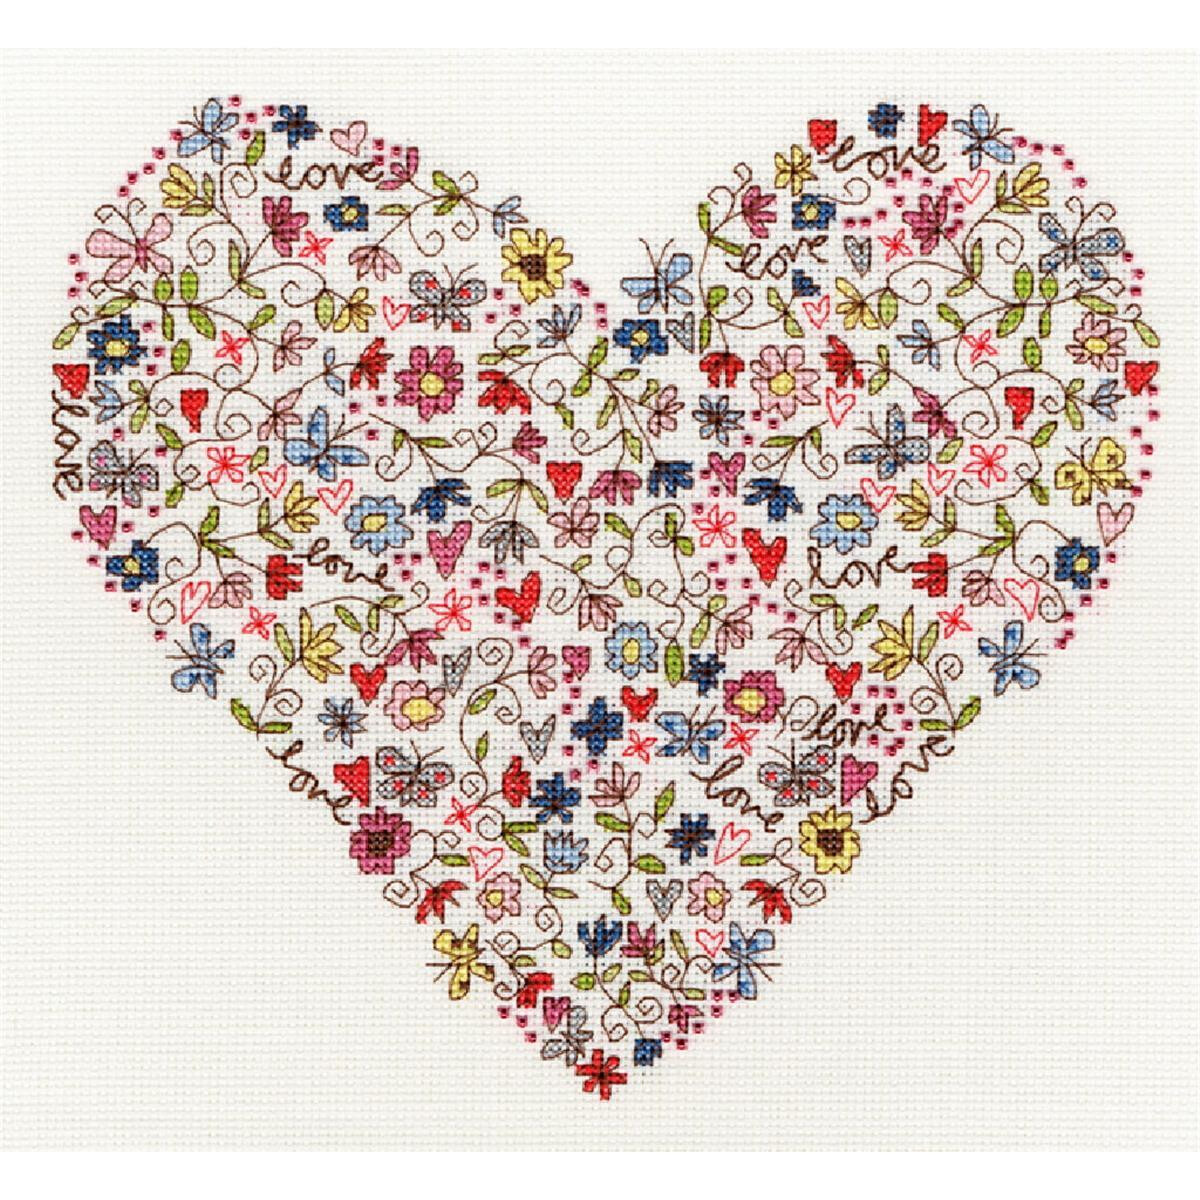 A heart-shaped embroidery pack filled with colorful...